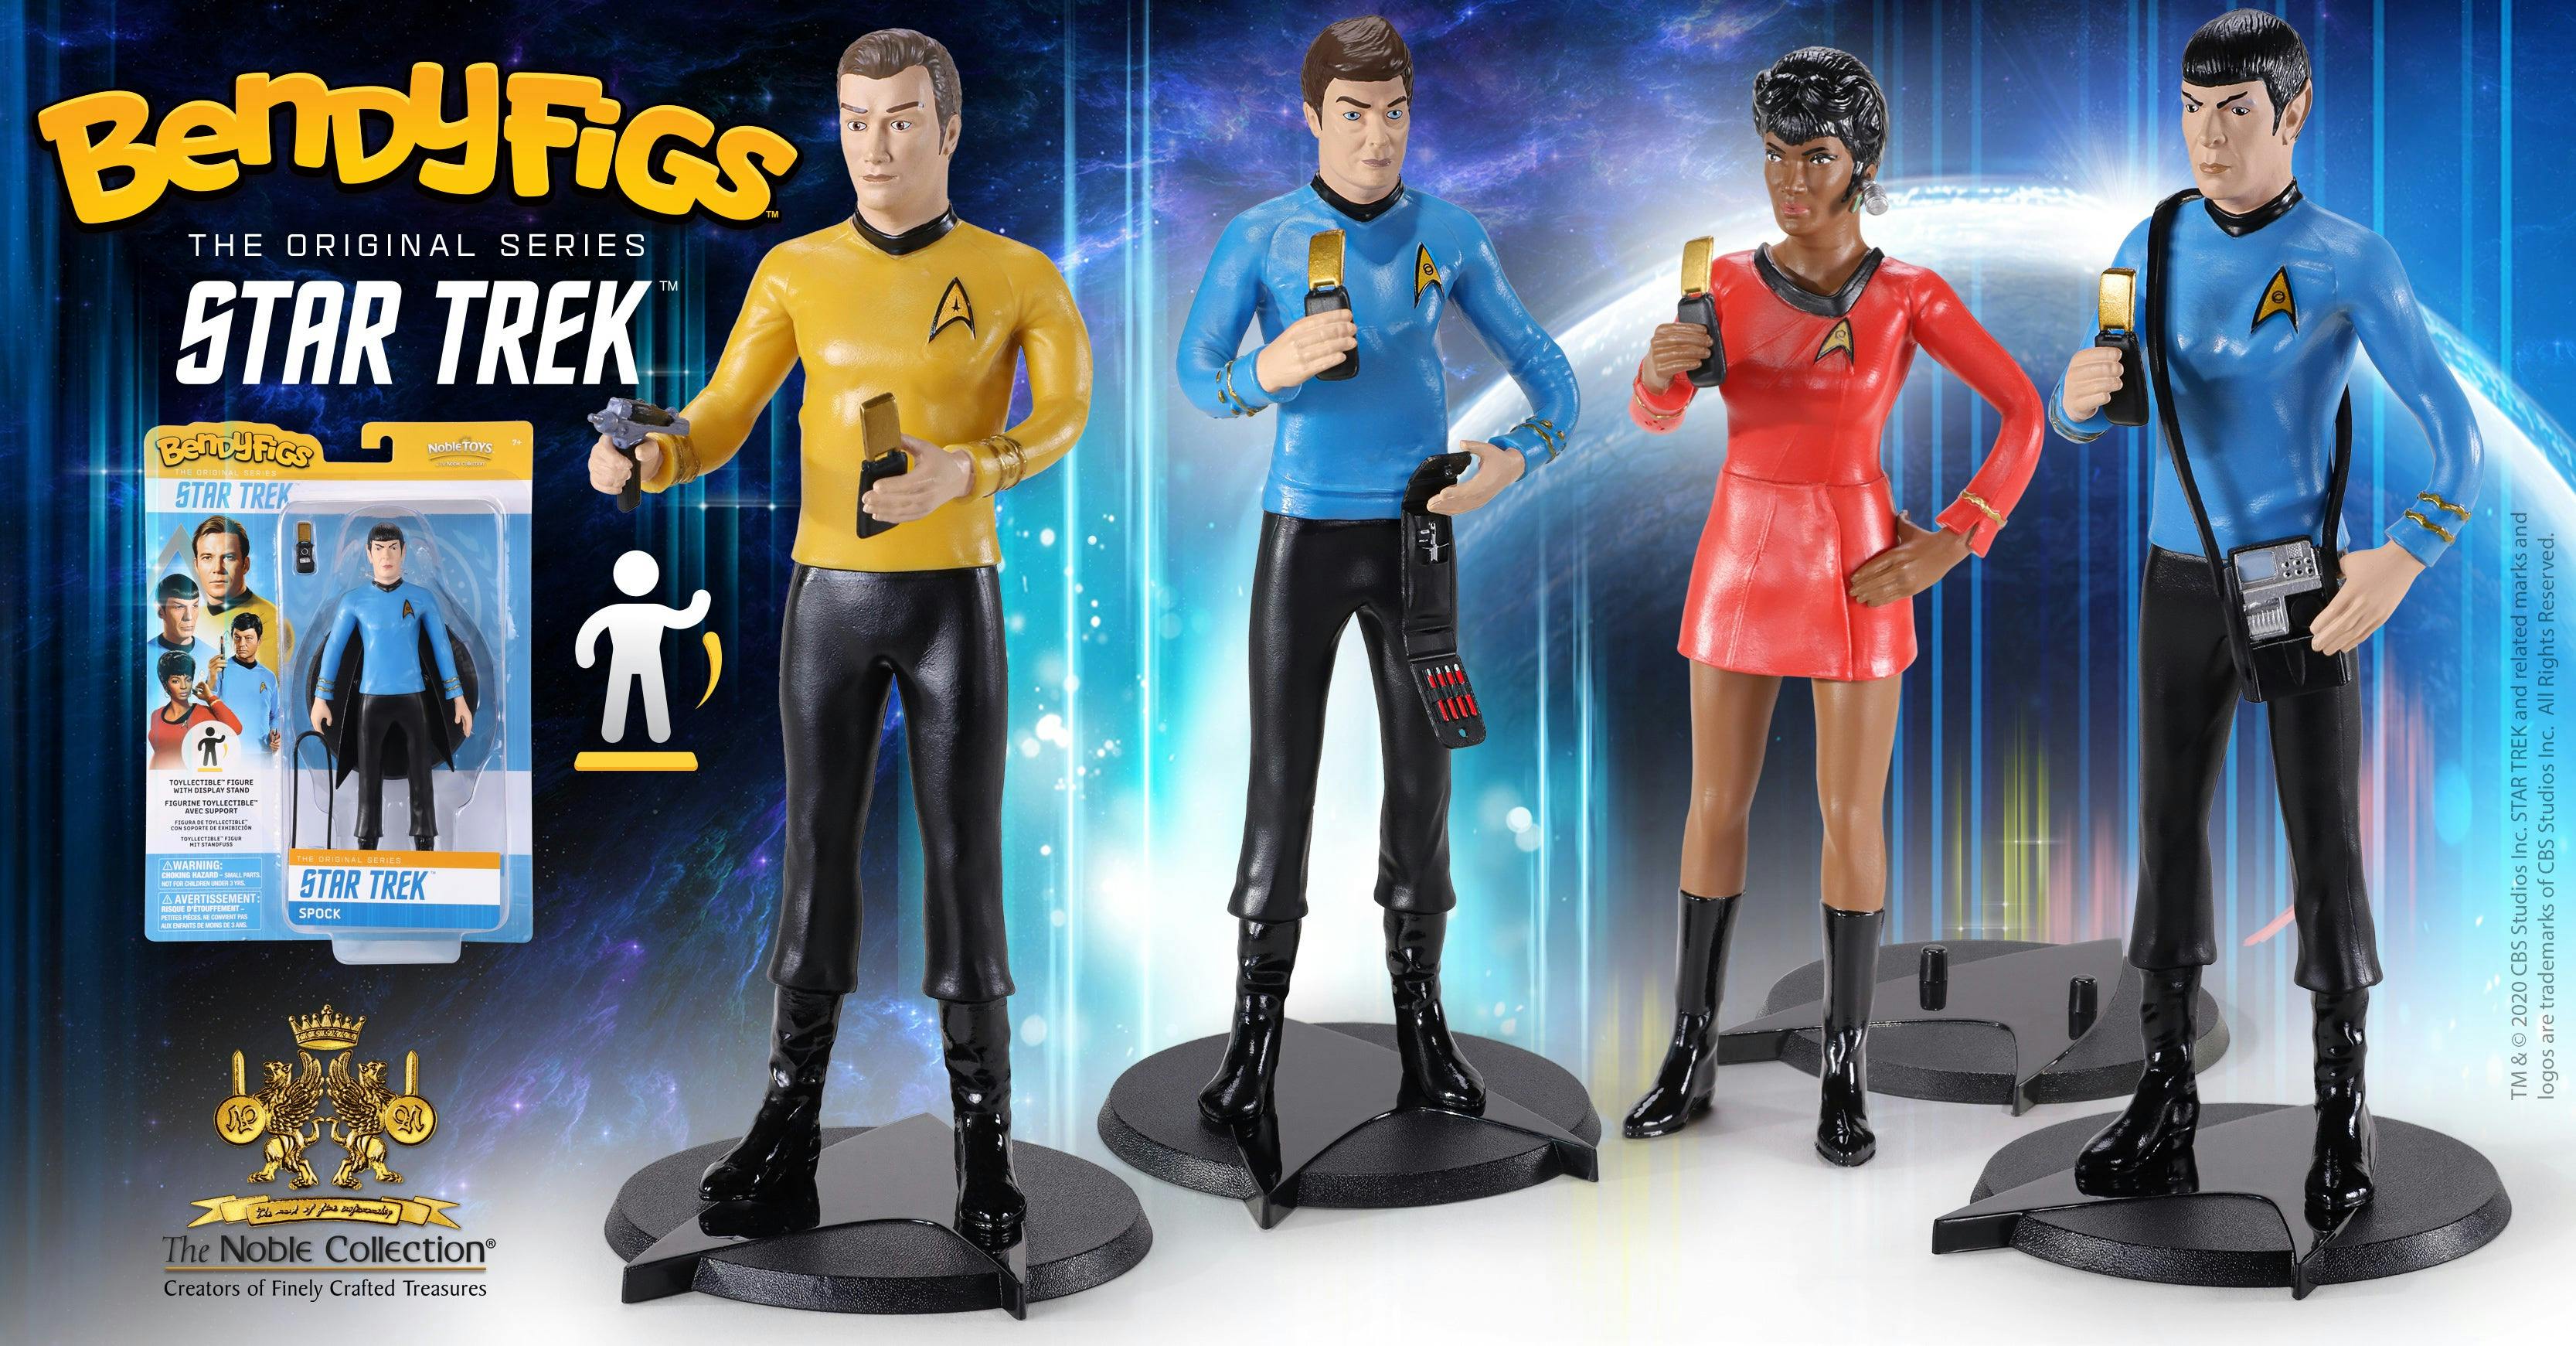 The 2019 Star Trek Holiday Gift Guide